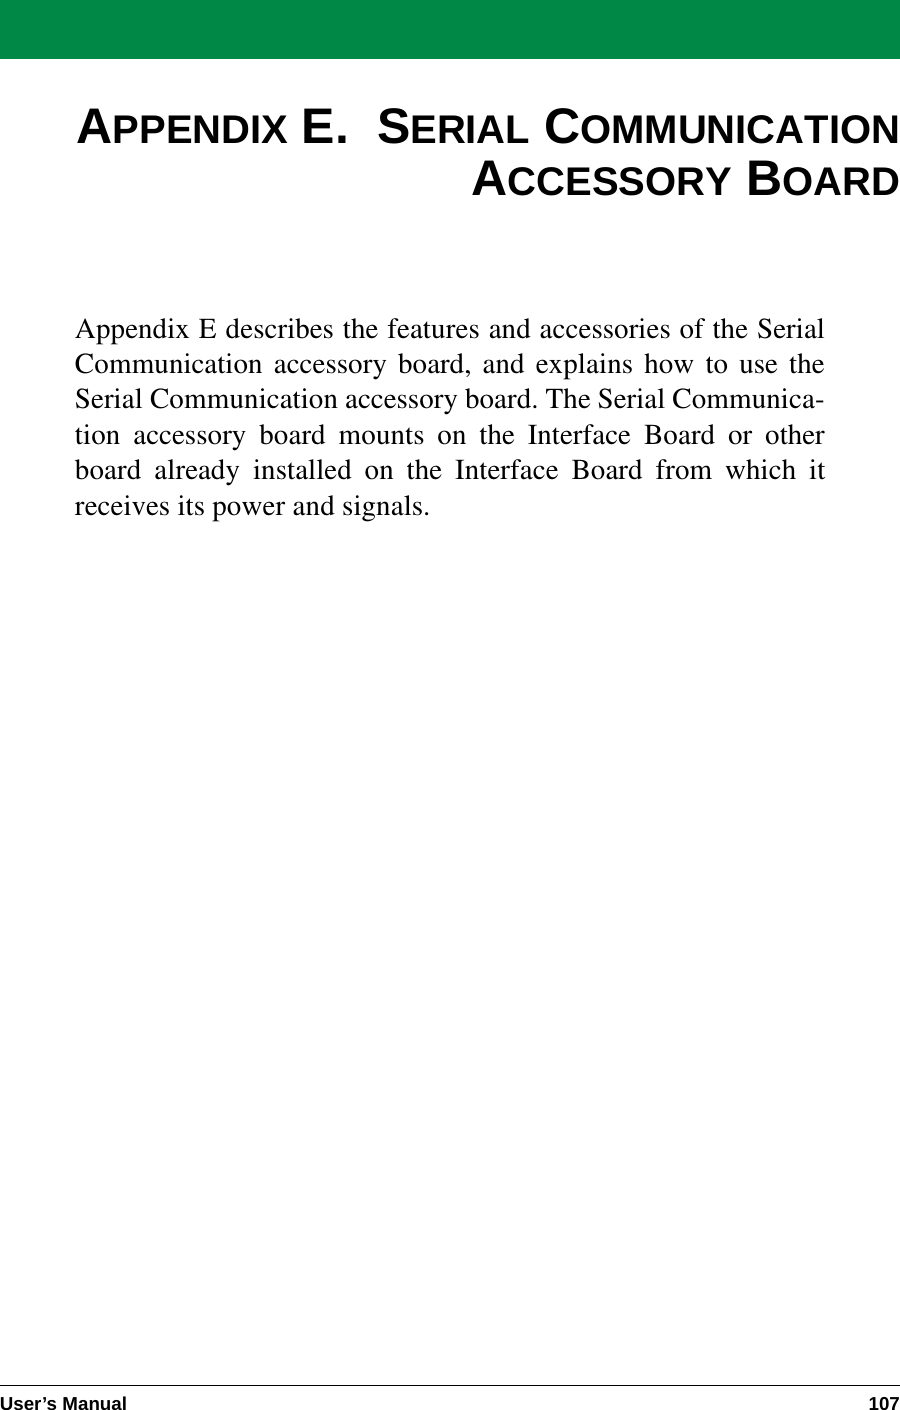 User’s Manual 107APPENDIX E.  SERIAL COMMUNICATIONACCESSORY BOARDAppendix E describes the features and accessories of the SerialCommunication accessory board, and explains how to use theSerial Communication accessory board. The Serial Communica-tion accessory board mounts on the Interface Board or otherboard already installed on the Interface Board from which itreceives its power and signals.